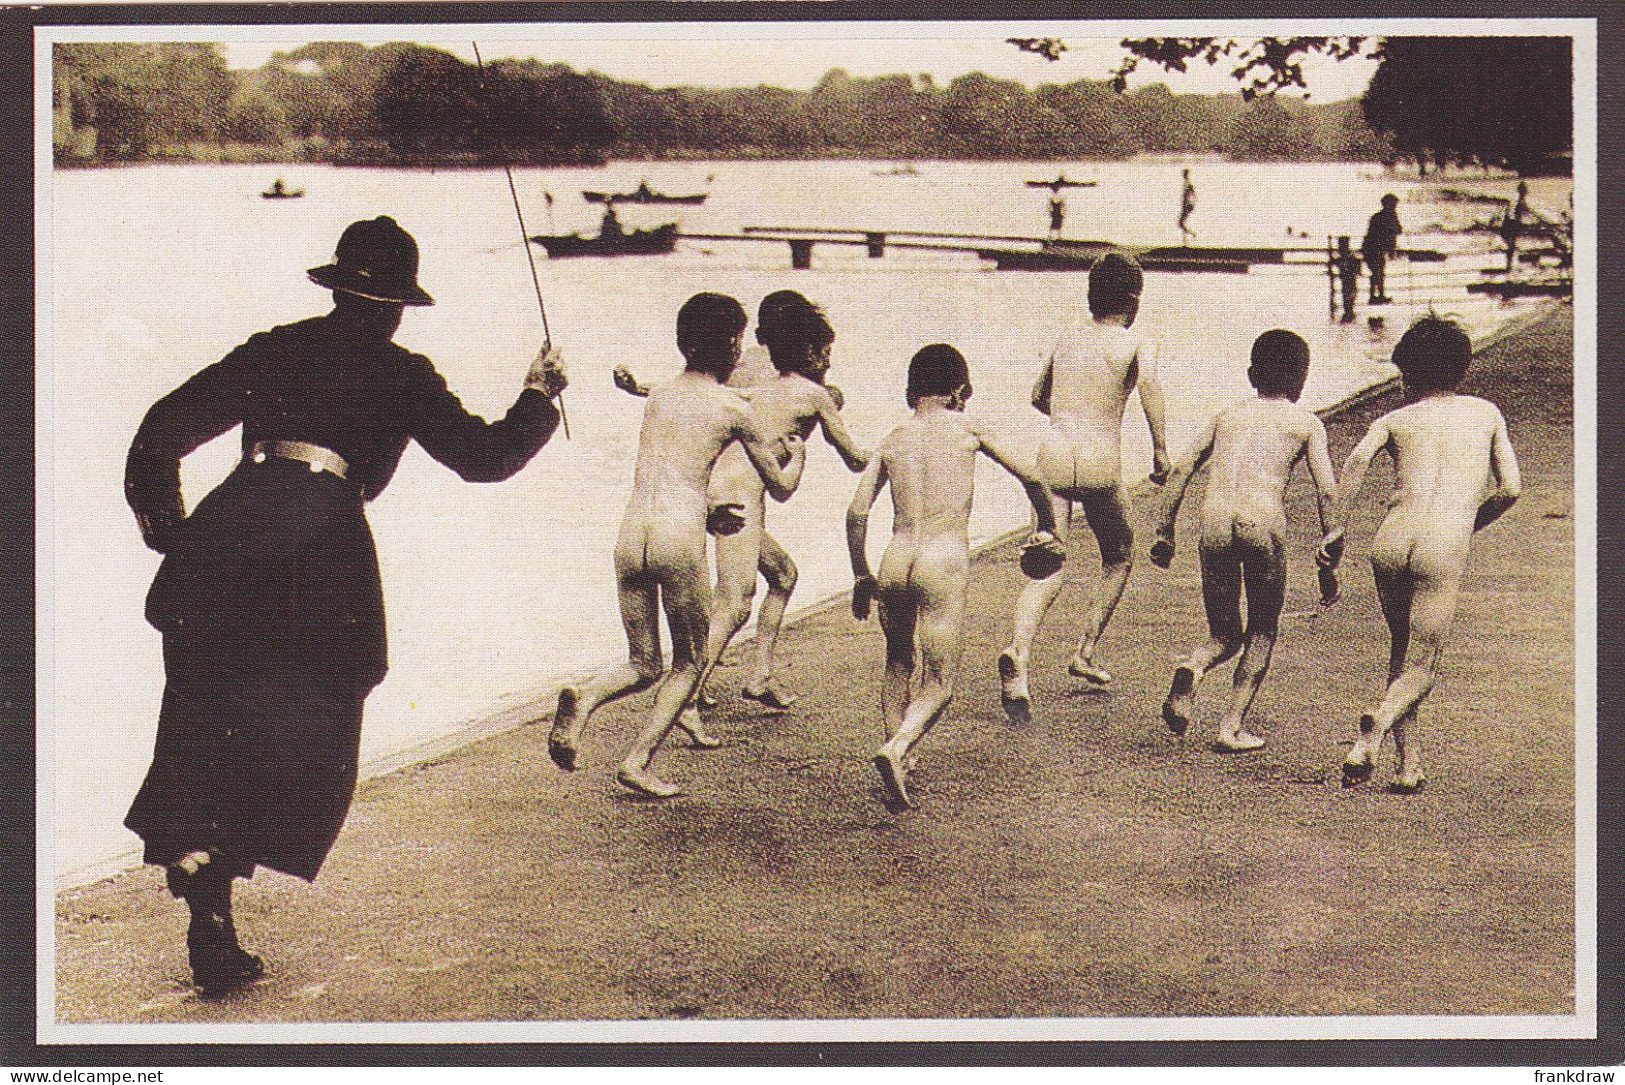 Nostalgia Postcard - Boys Will Be Boys, Illicit Bathers At The Serpentine In Hyde Park, London 1926 - VG - Unclassified